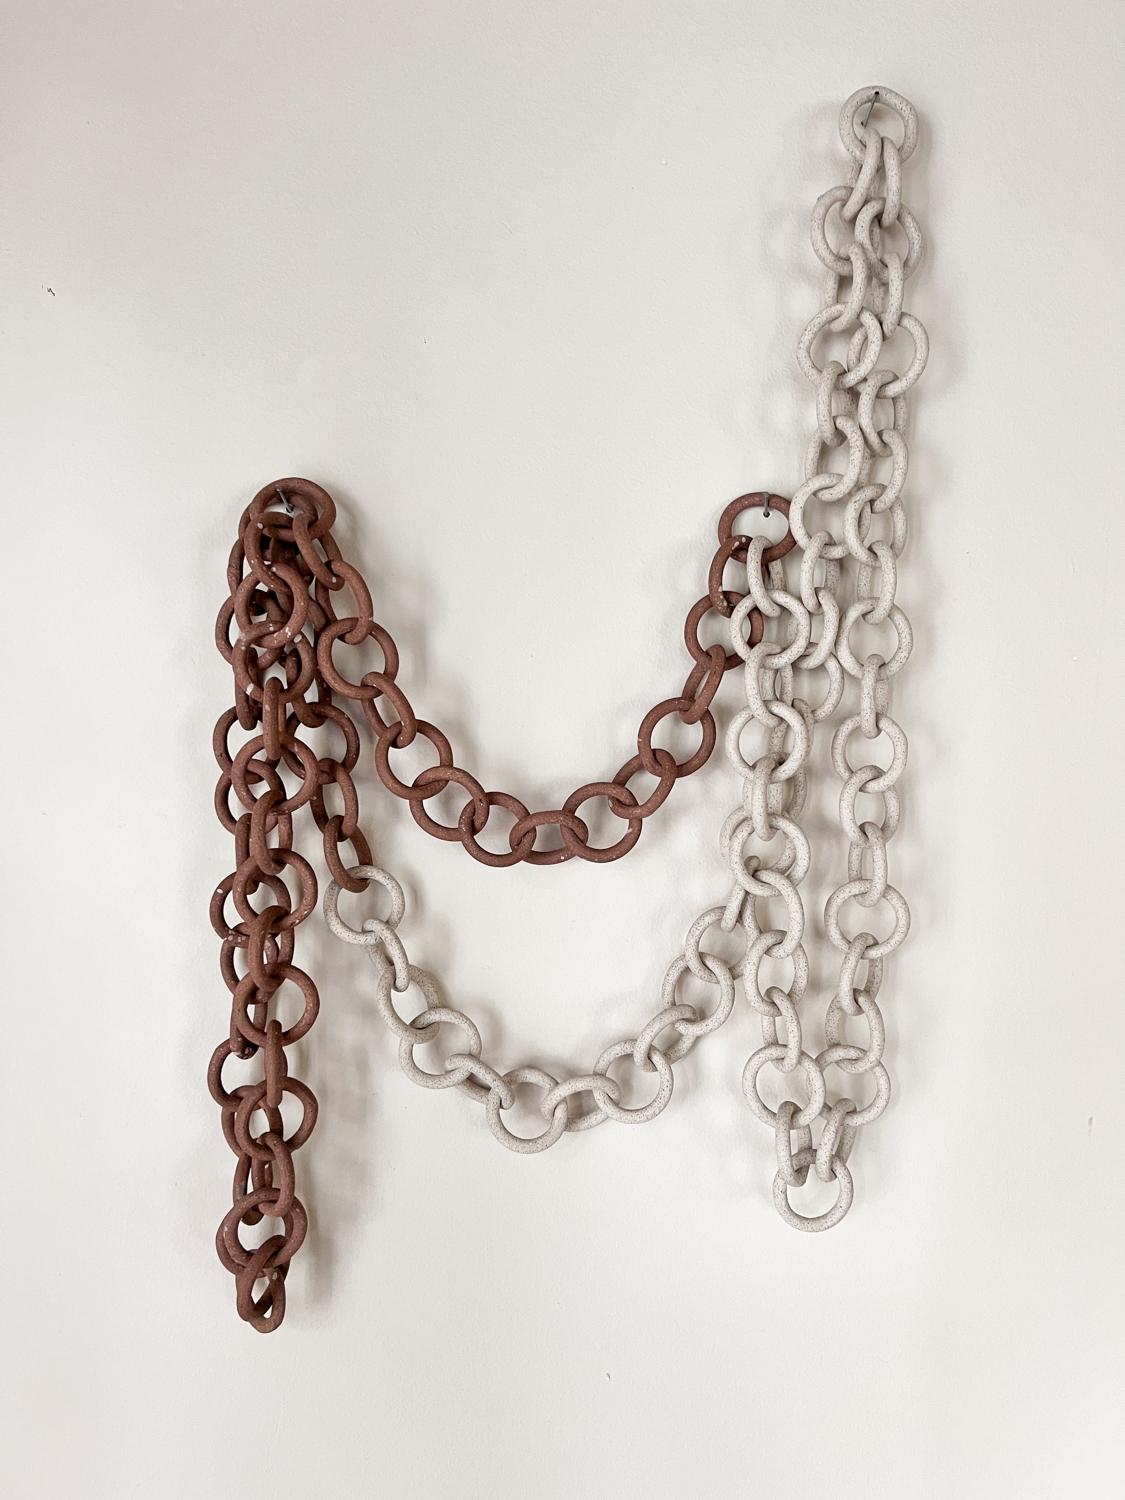 Ceramic Link Chain Sculpture and Wall Hanging In New Condition For Sale In Stoughton, MA